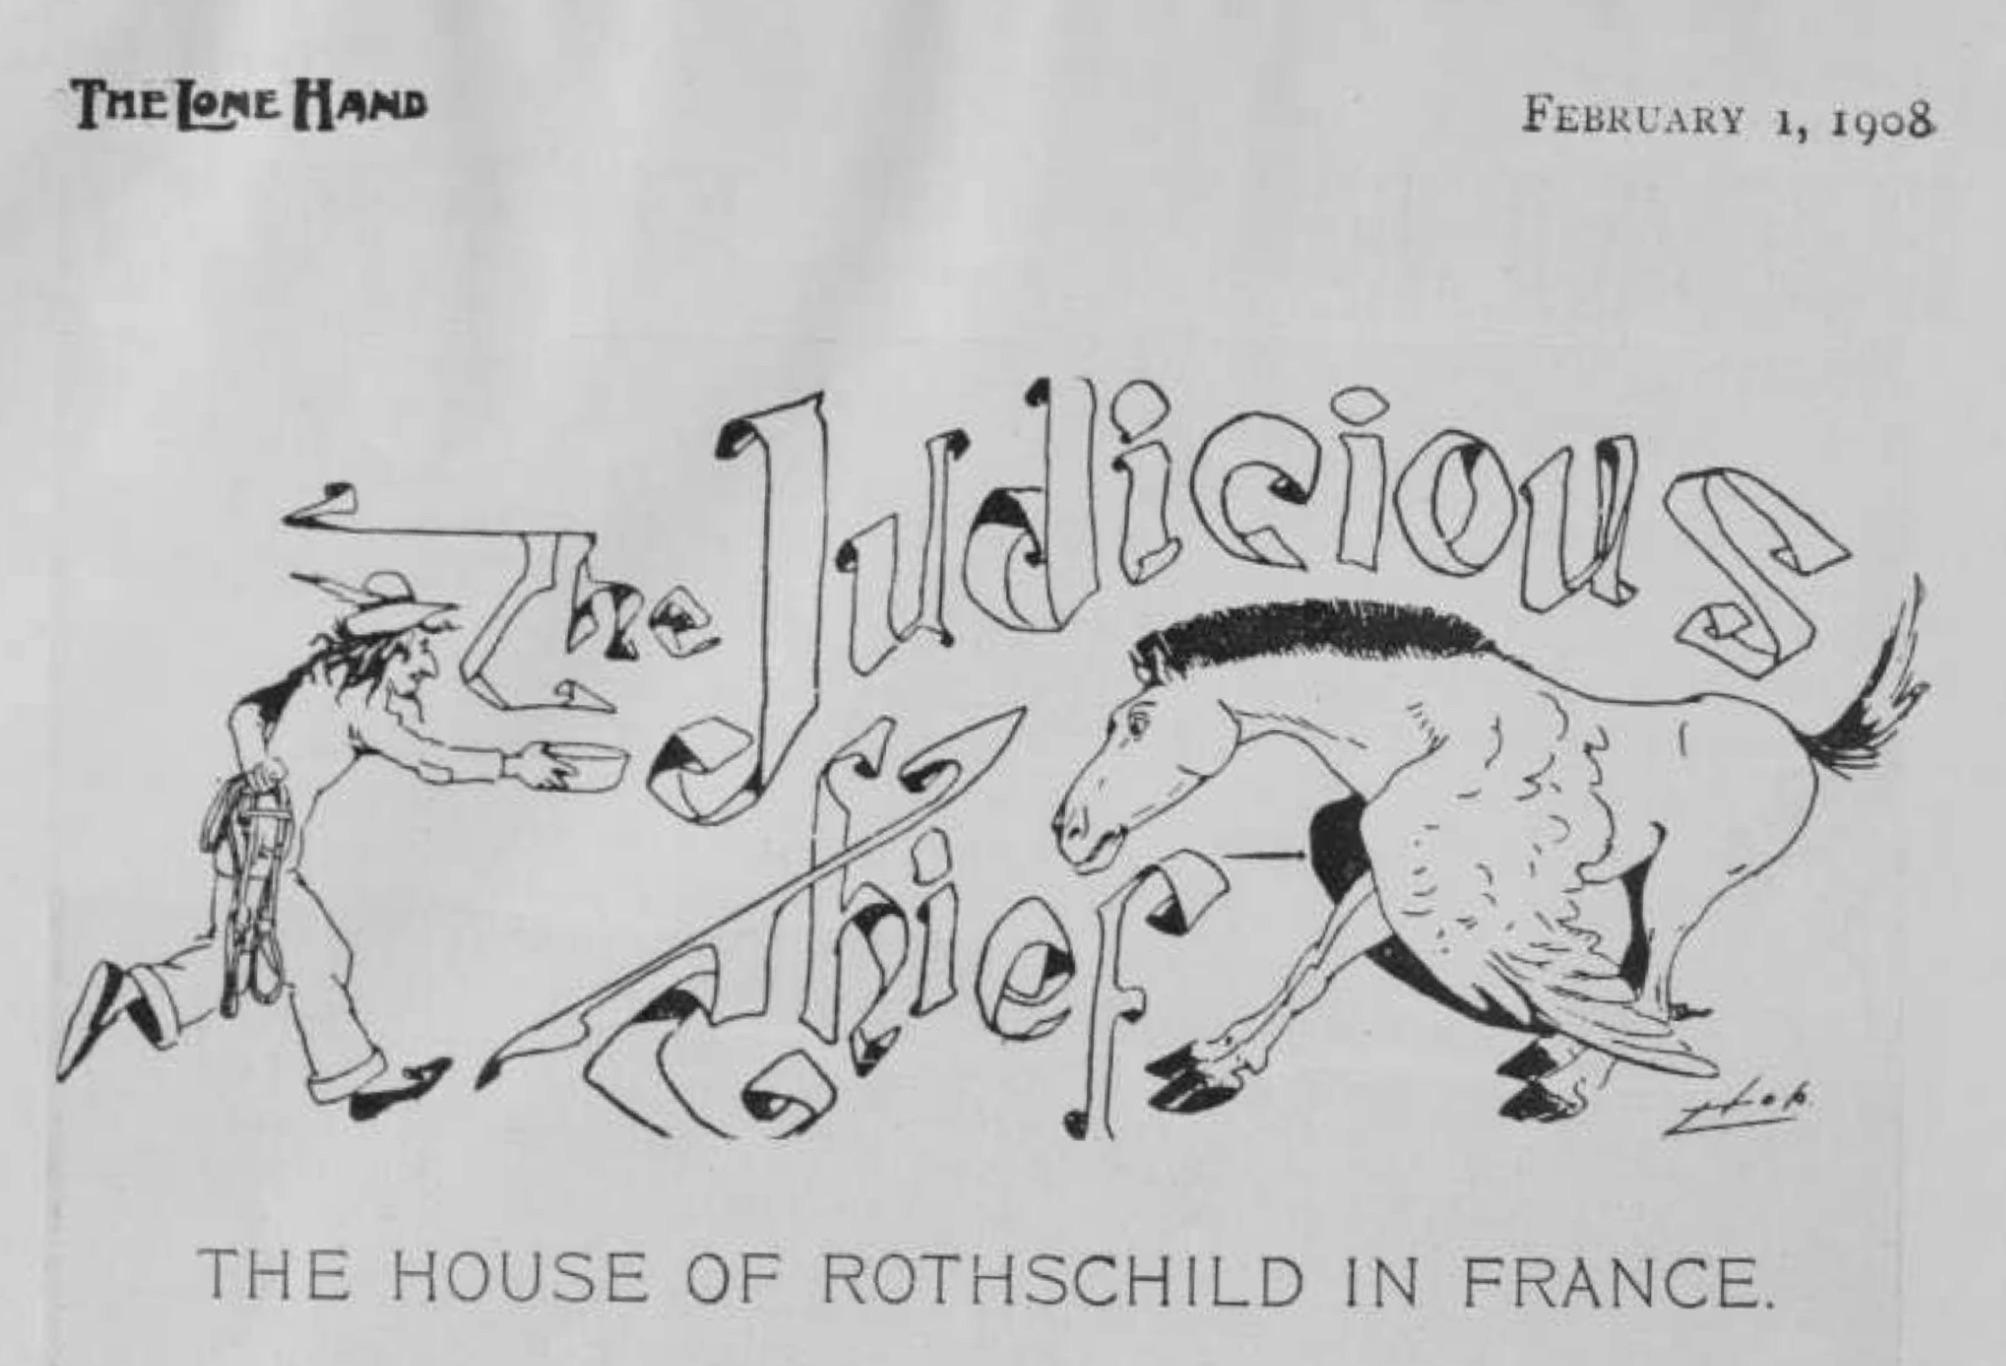 The House of Rothschild in France - The Judicious Thief (1908) by Charles Engels & Octavius C. Beale